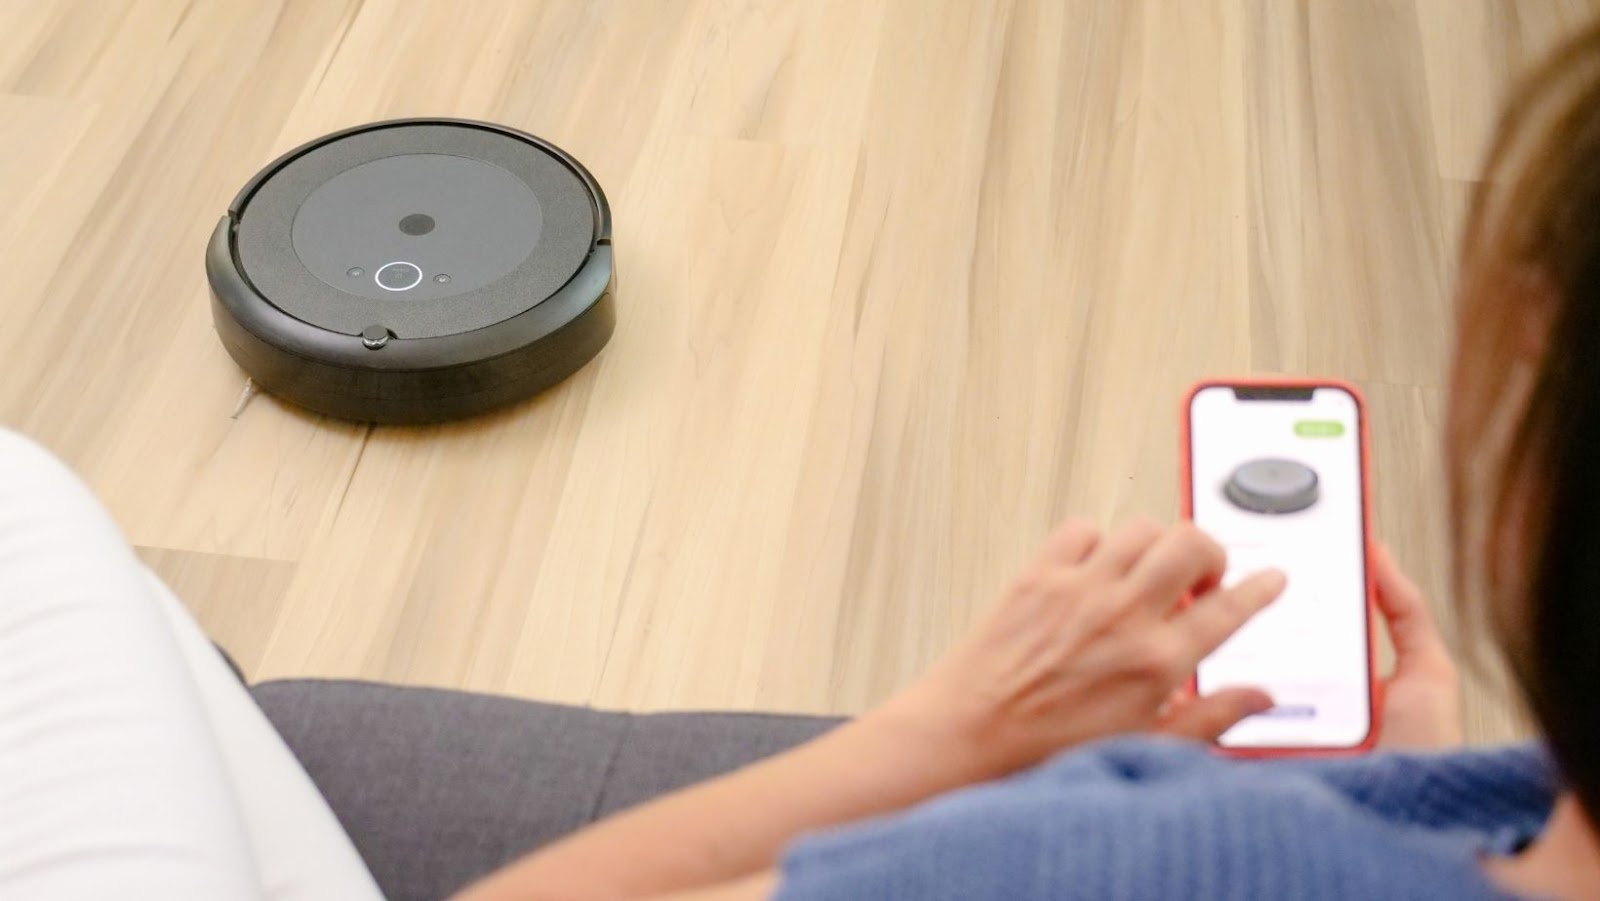 Get your Roomba charged in no time